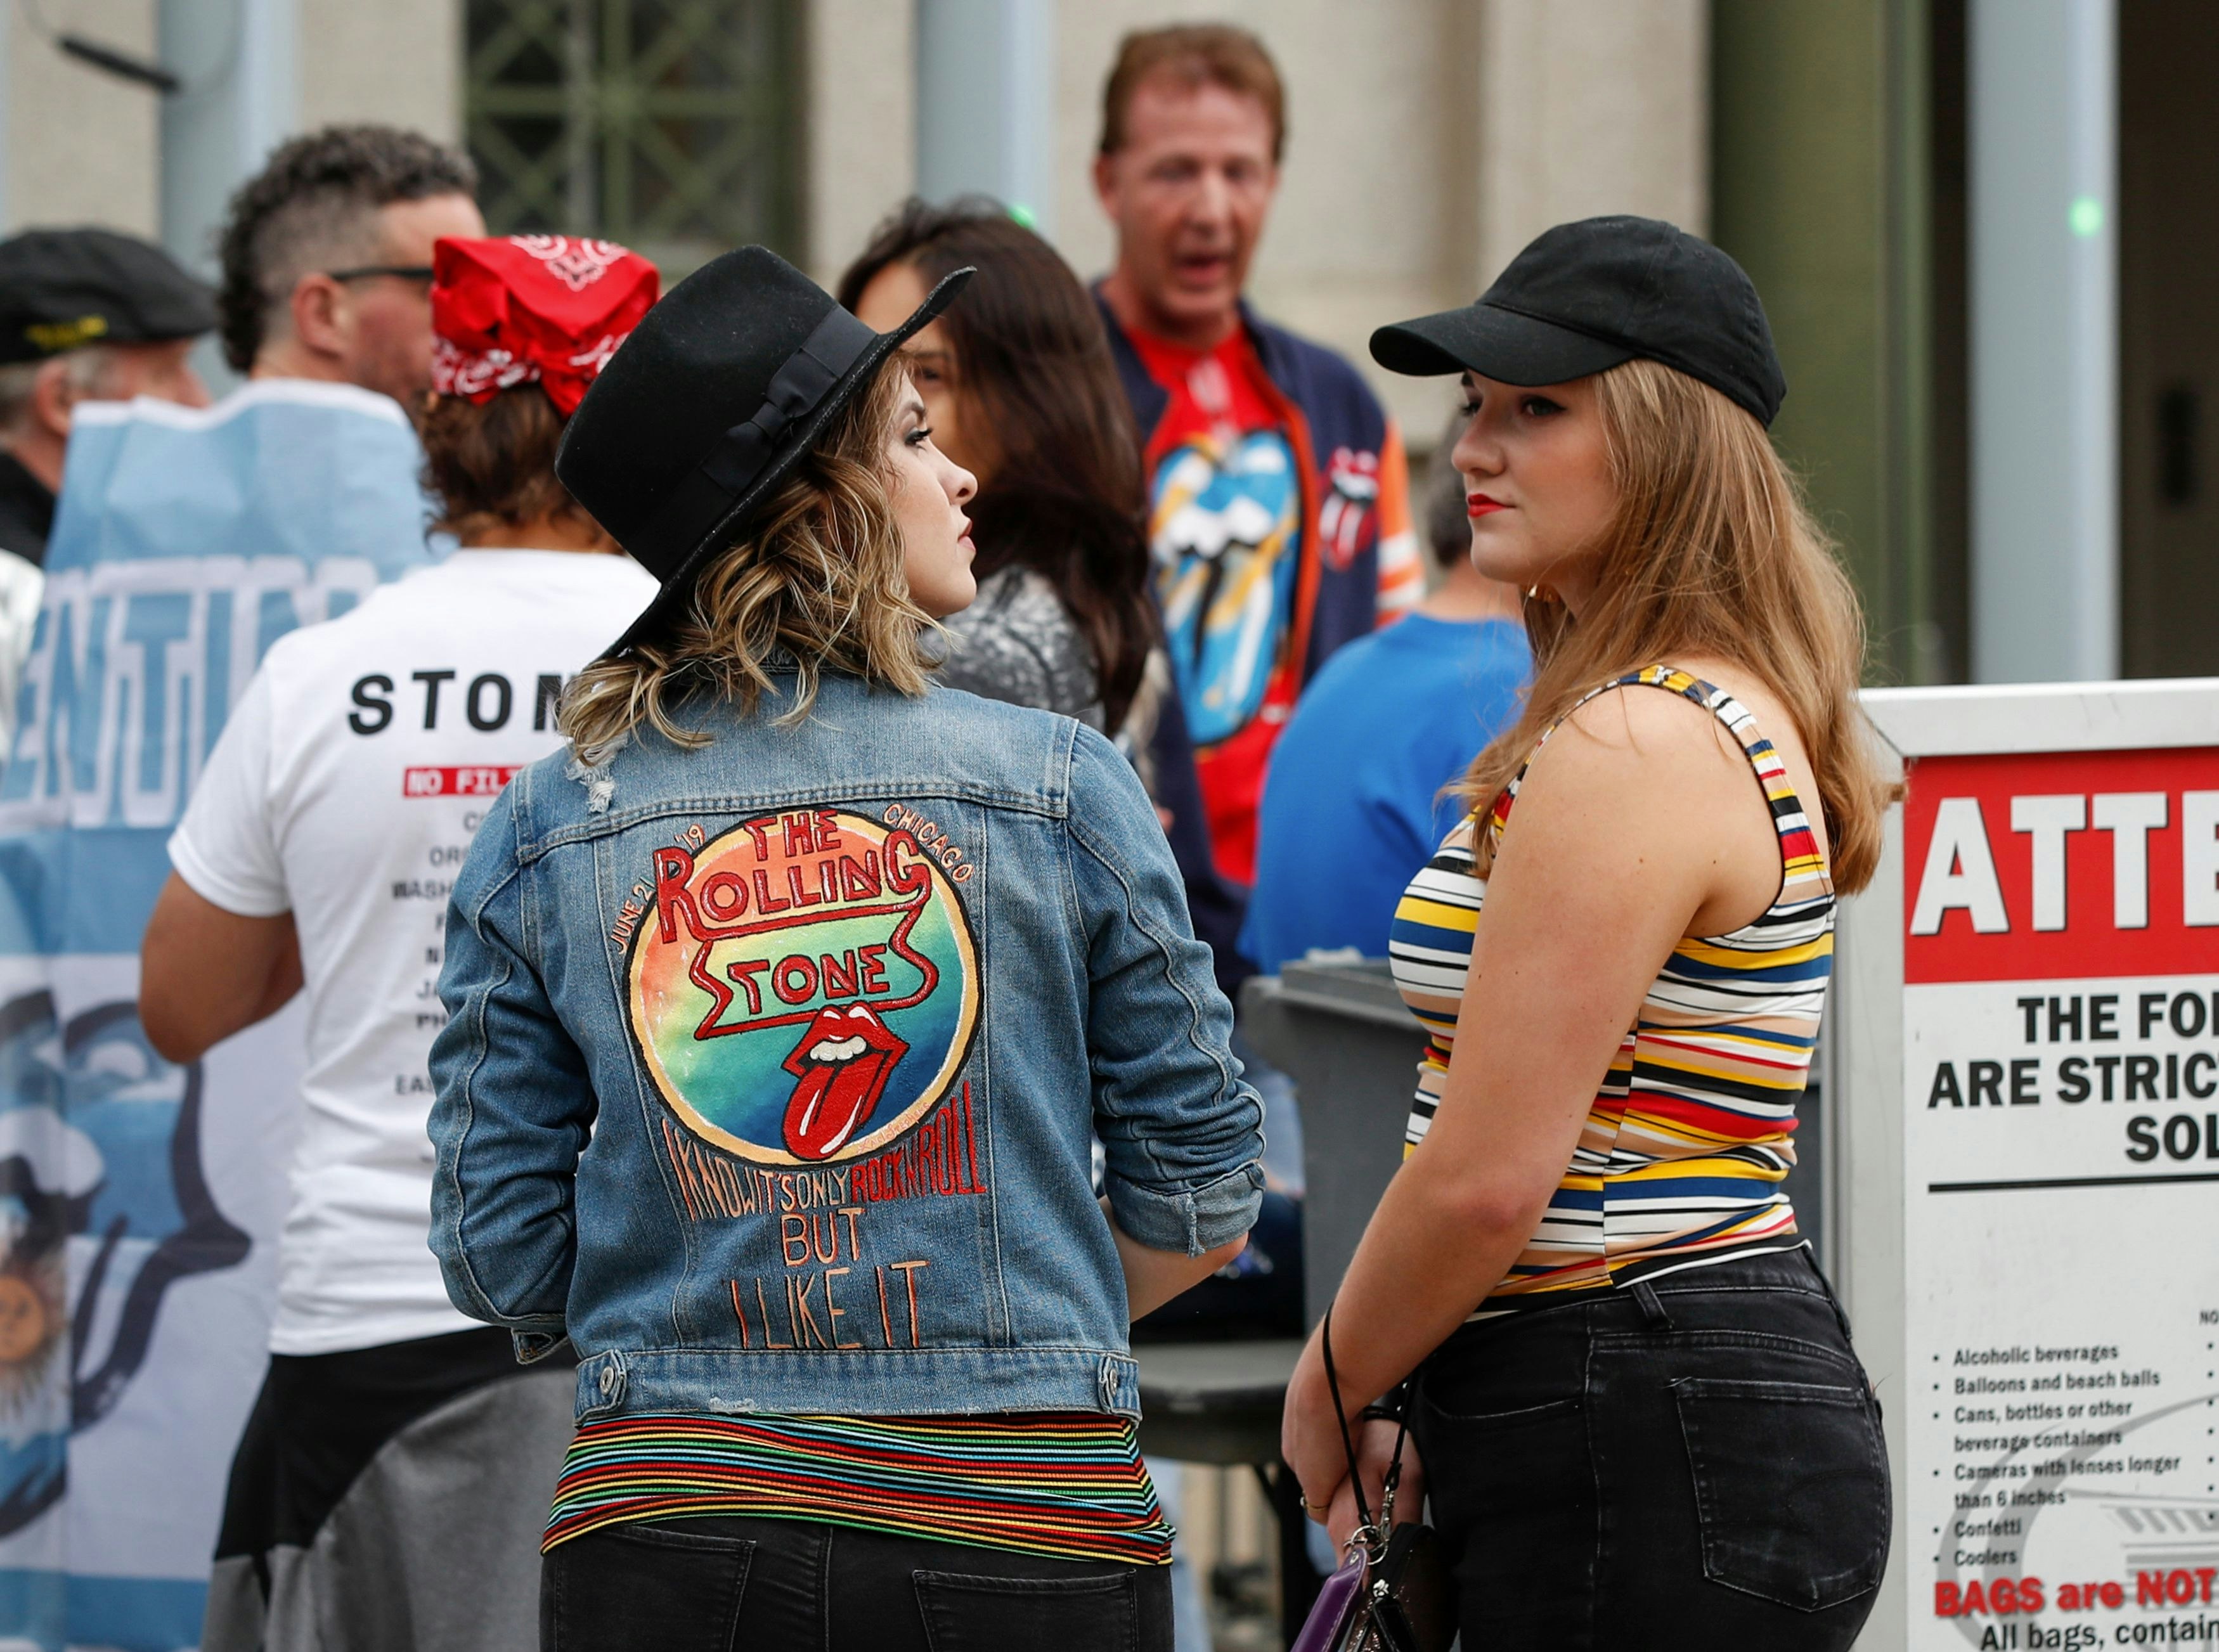 A pair of women in black jeans and black hats stand outside Soldier Field in Chicago ahead of a Rolling Stones concert. One has her back to the camera and is wearing a denim jacket embroidered with the Rolling Stones tongue logo and the lyric "I know it's only Rock N Roll But I Like It"